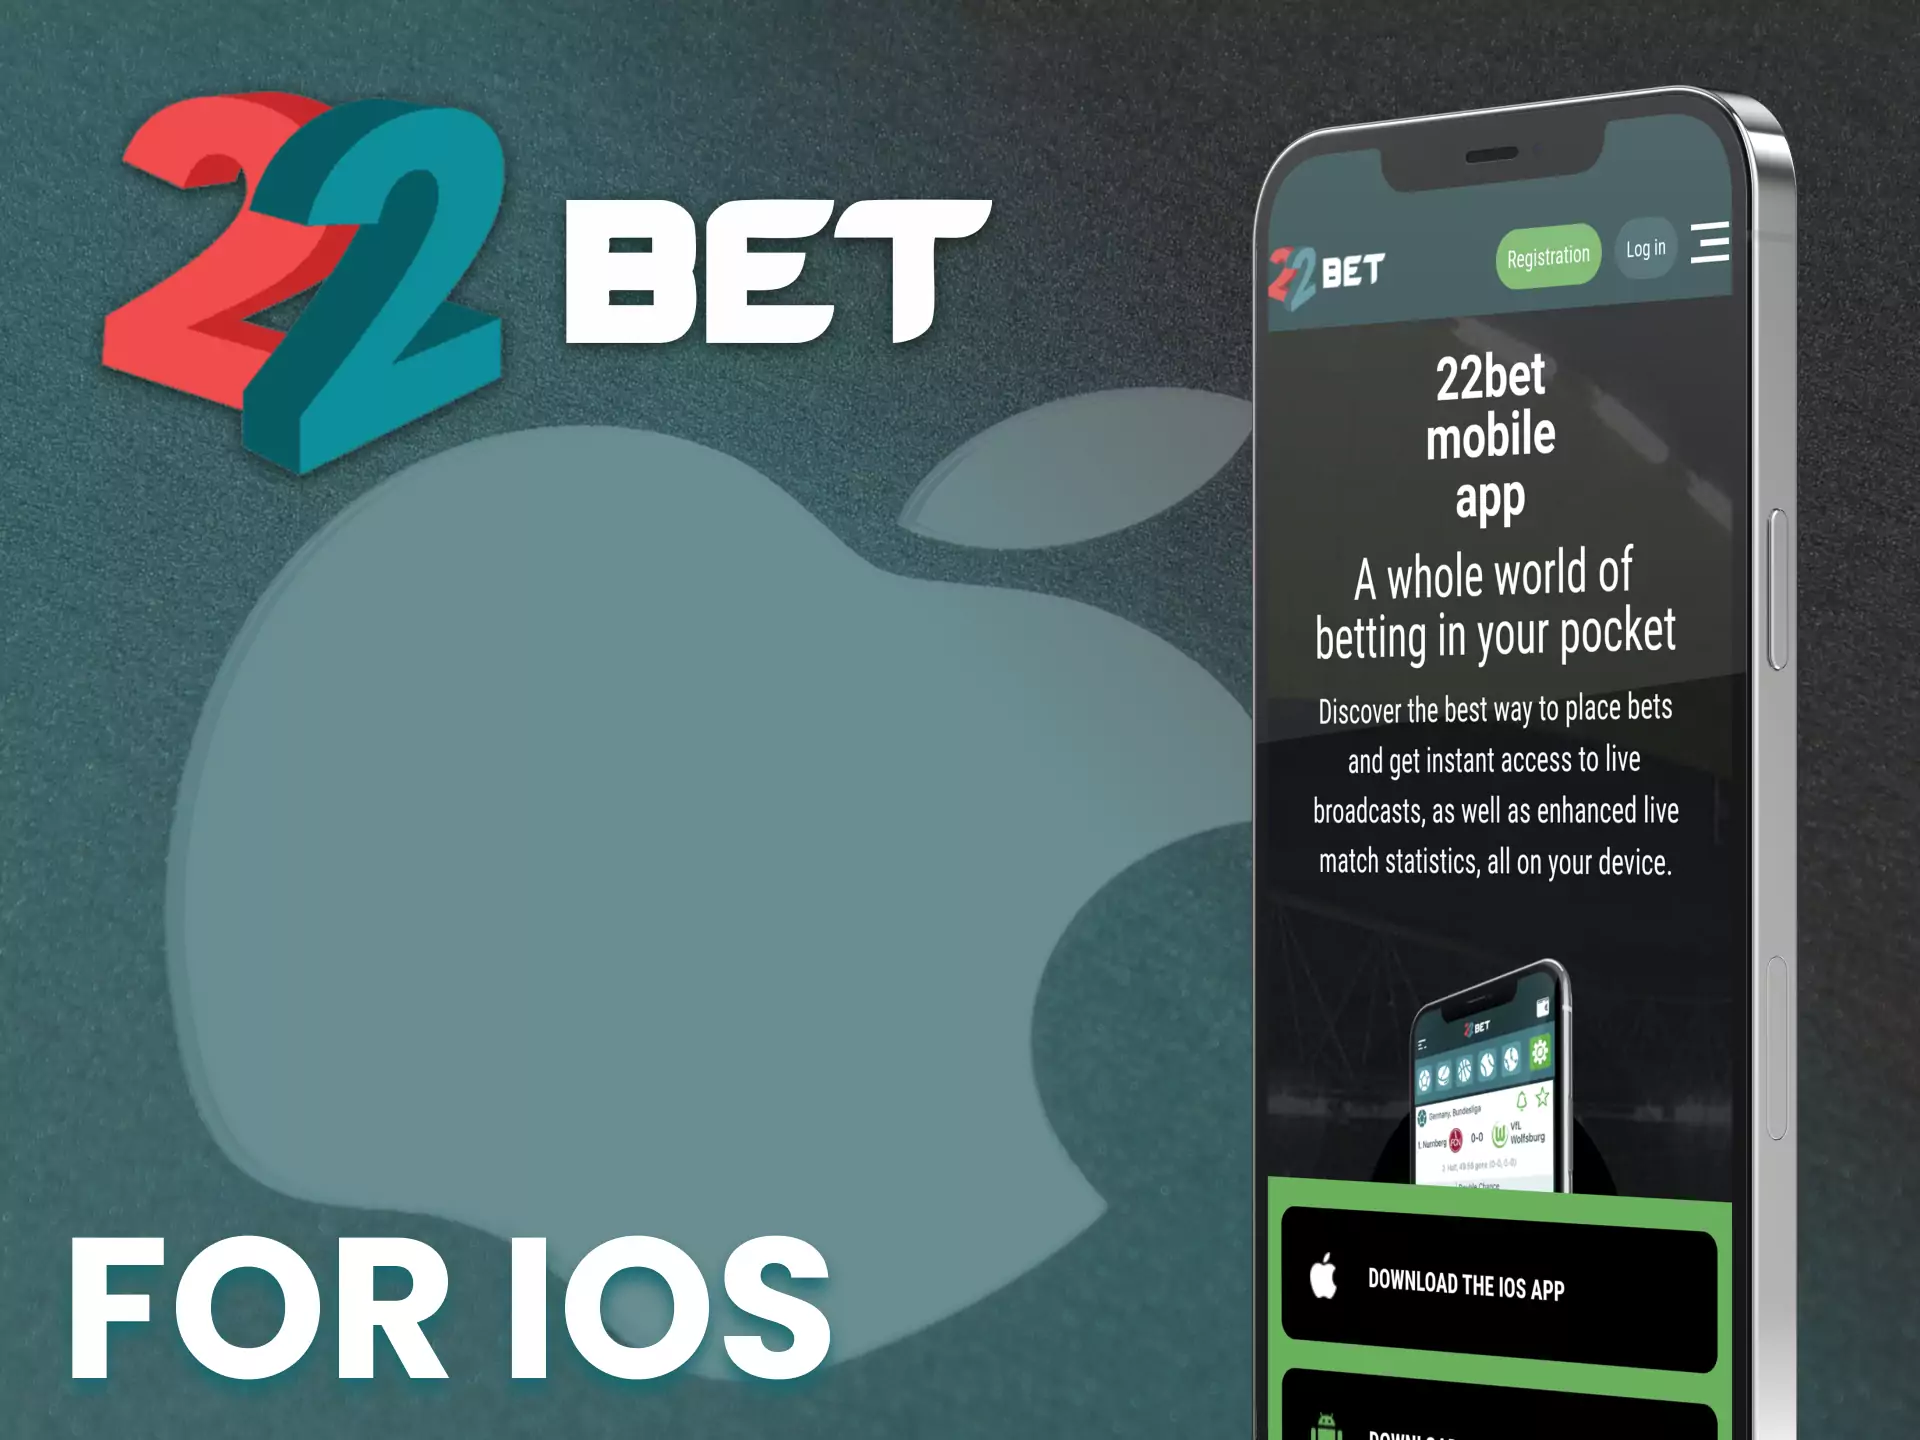 22bet app can be installed on your iOS phone.